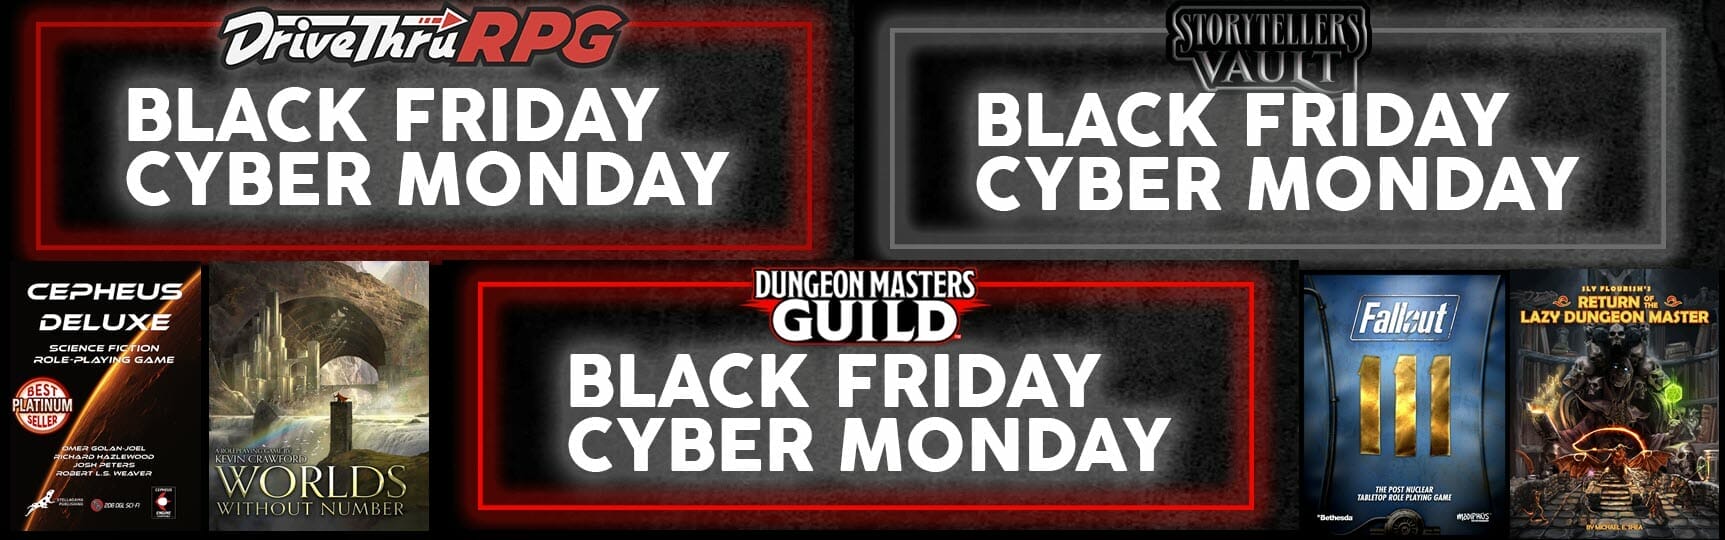 Early best-sellers: 4 days of Black Friday/Cyber Monday at DriveThruRPG & DMs Guild